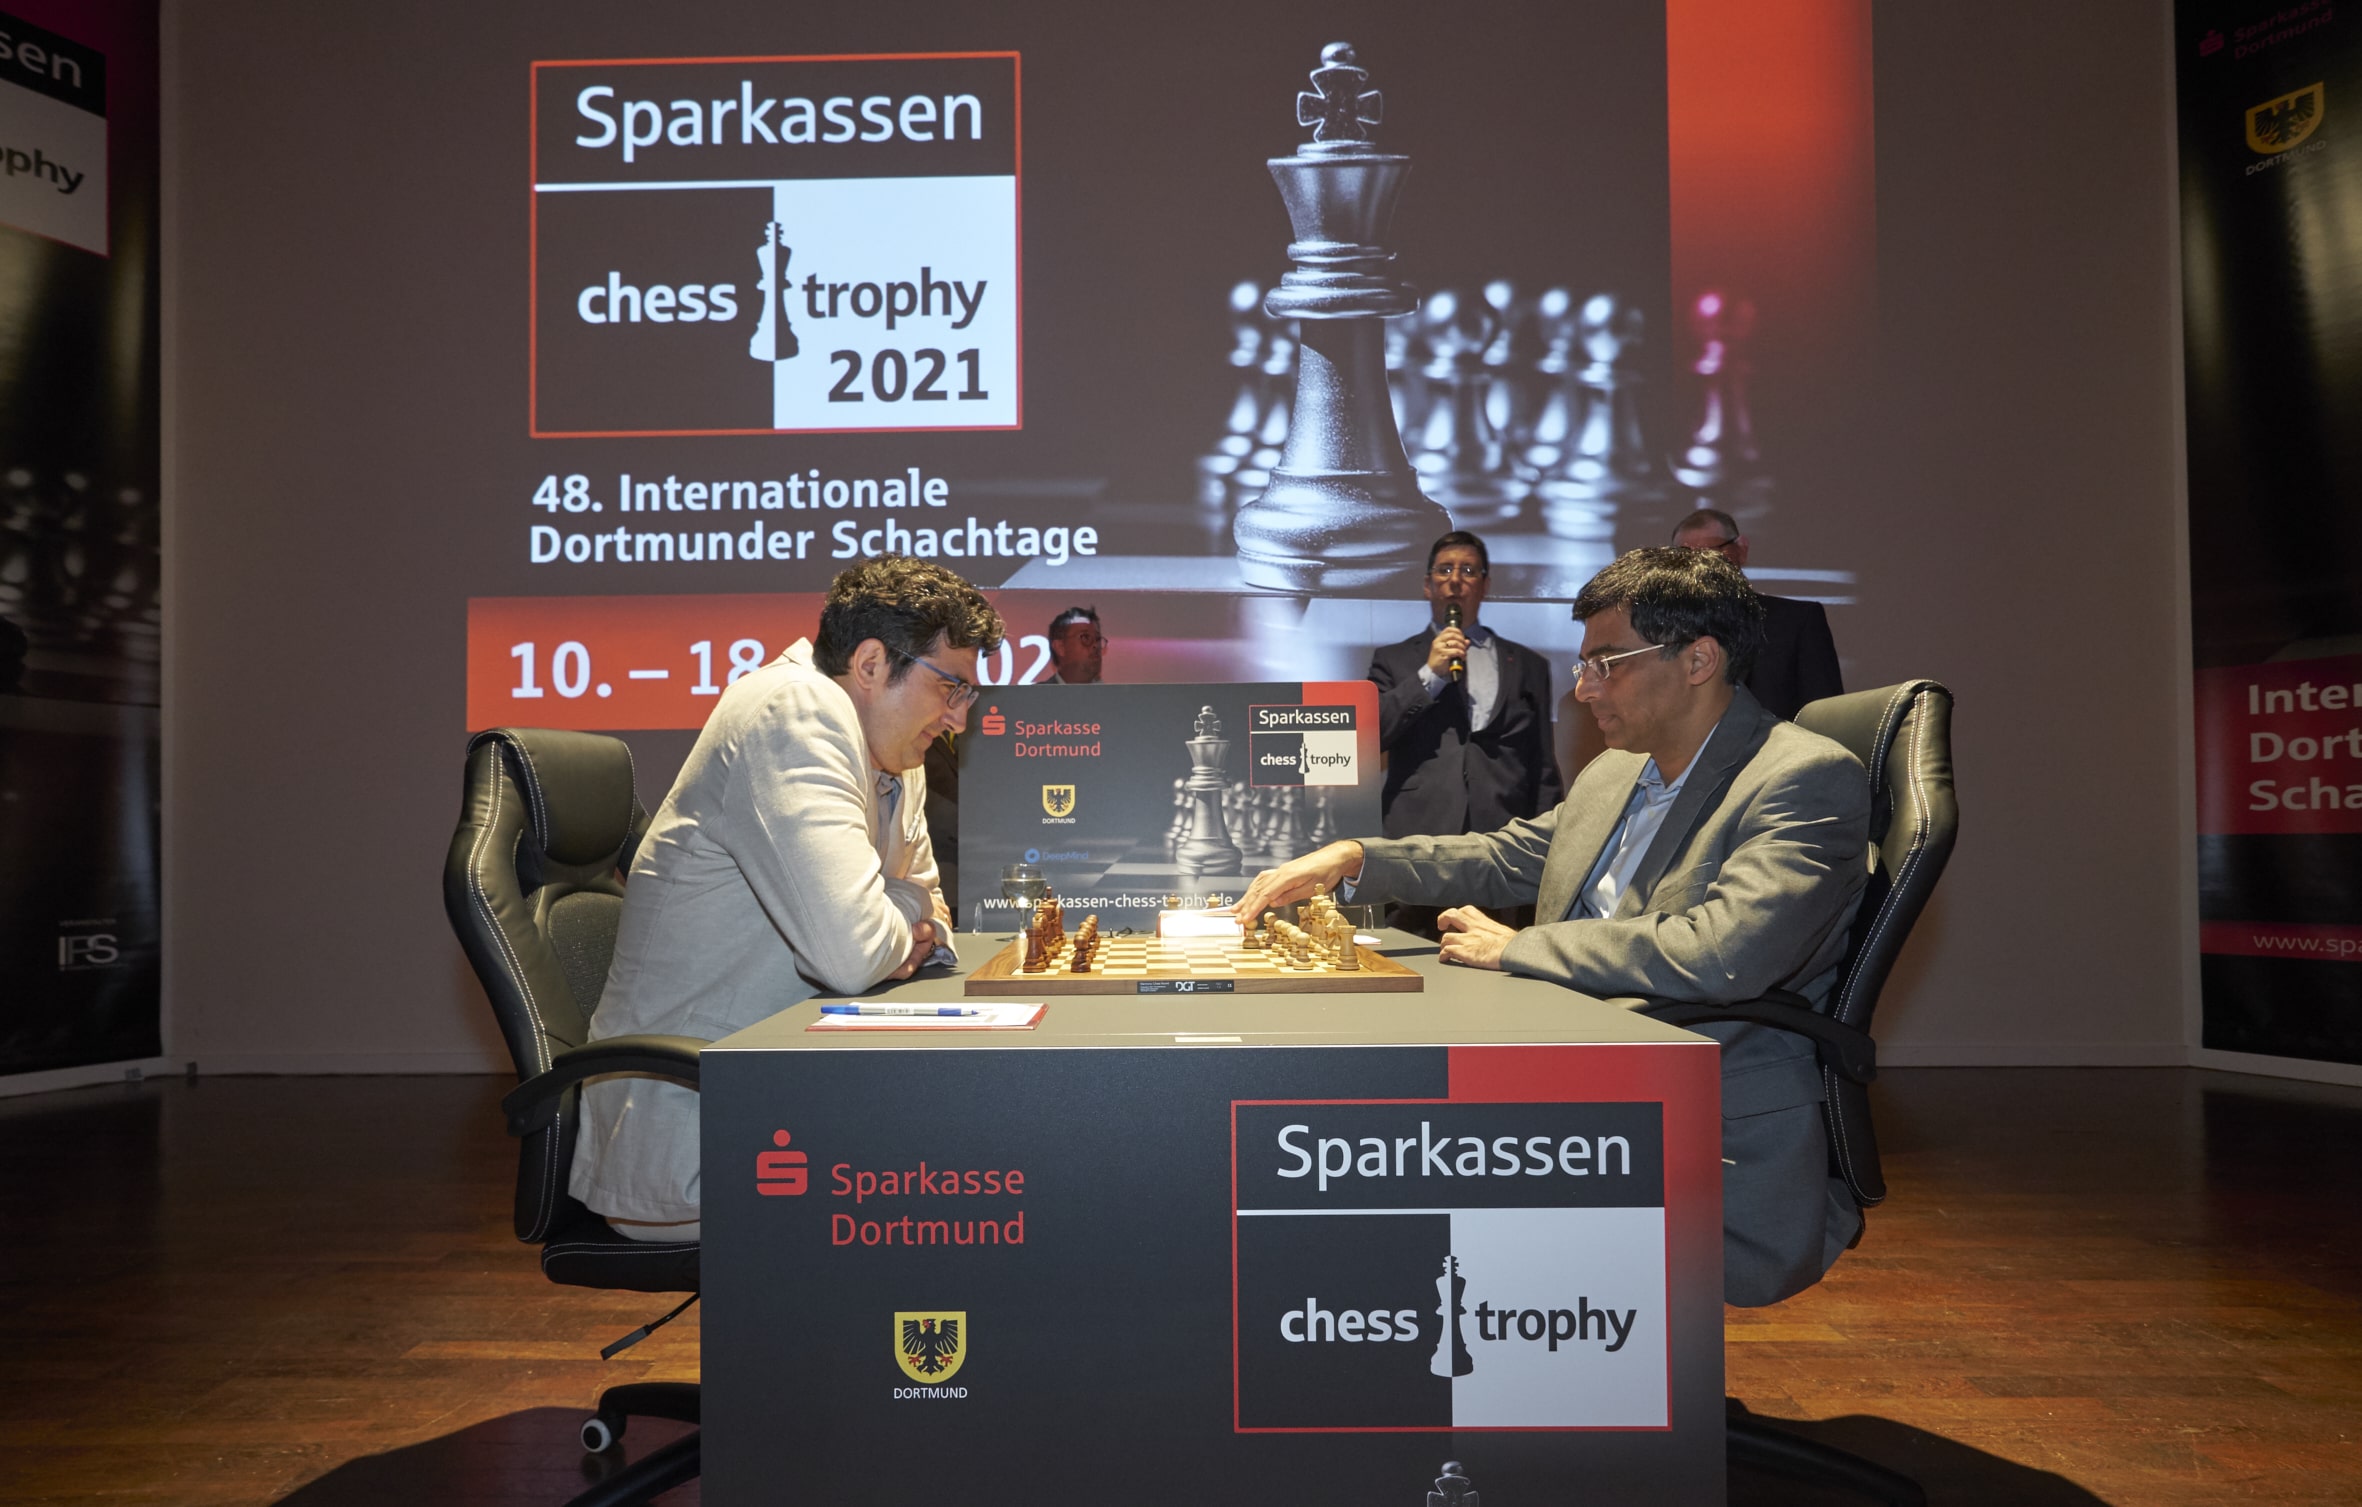 Opening game in the NC World Masters: Kramnik against Anand